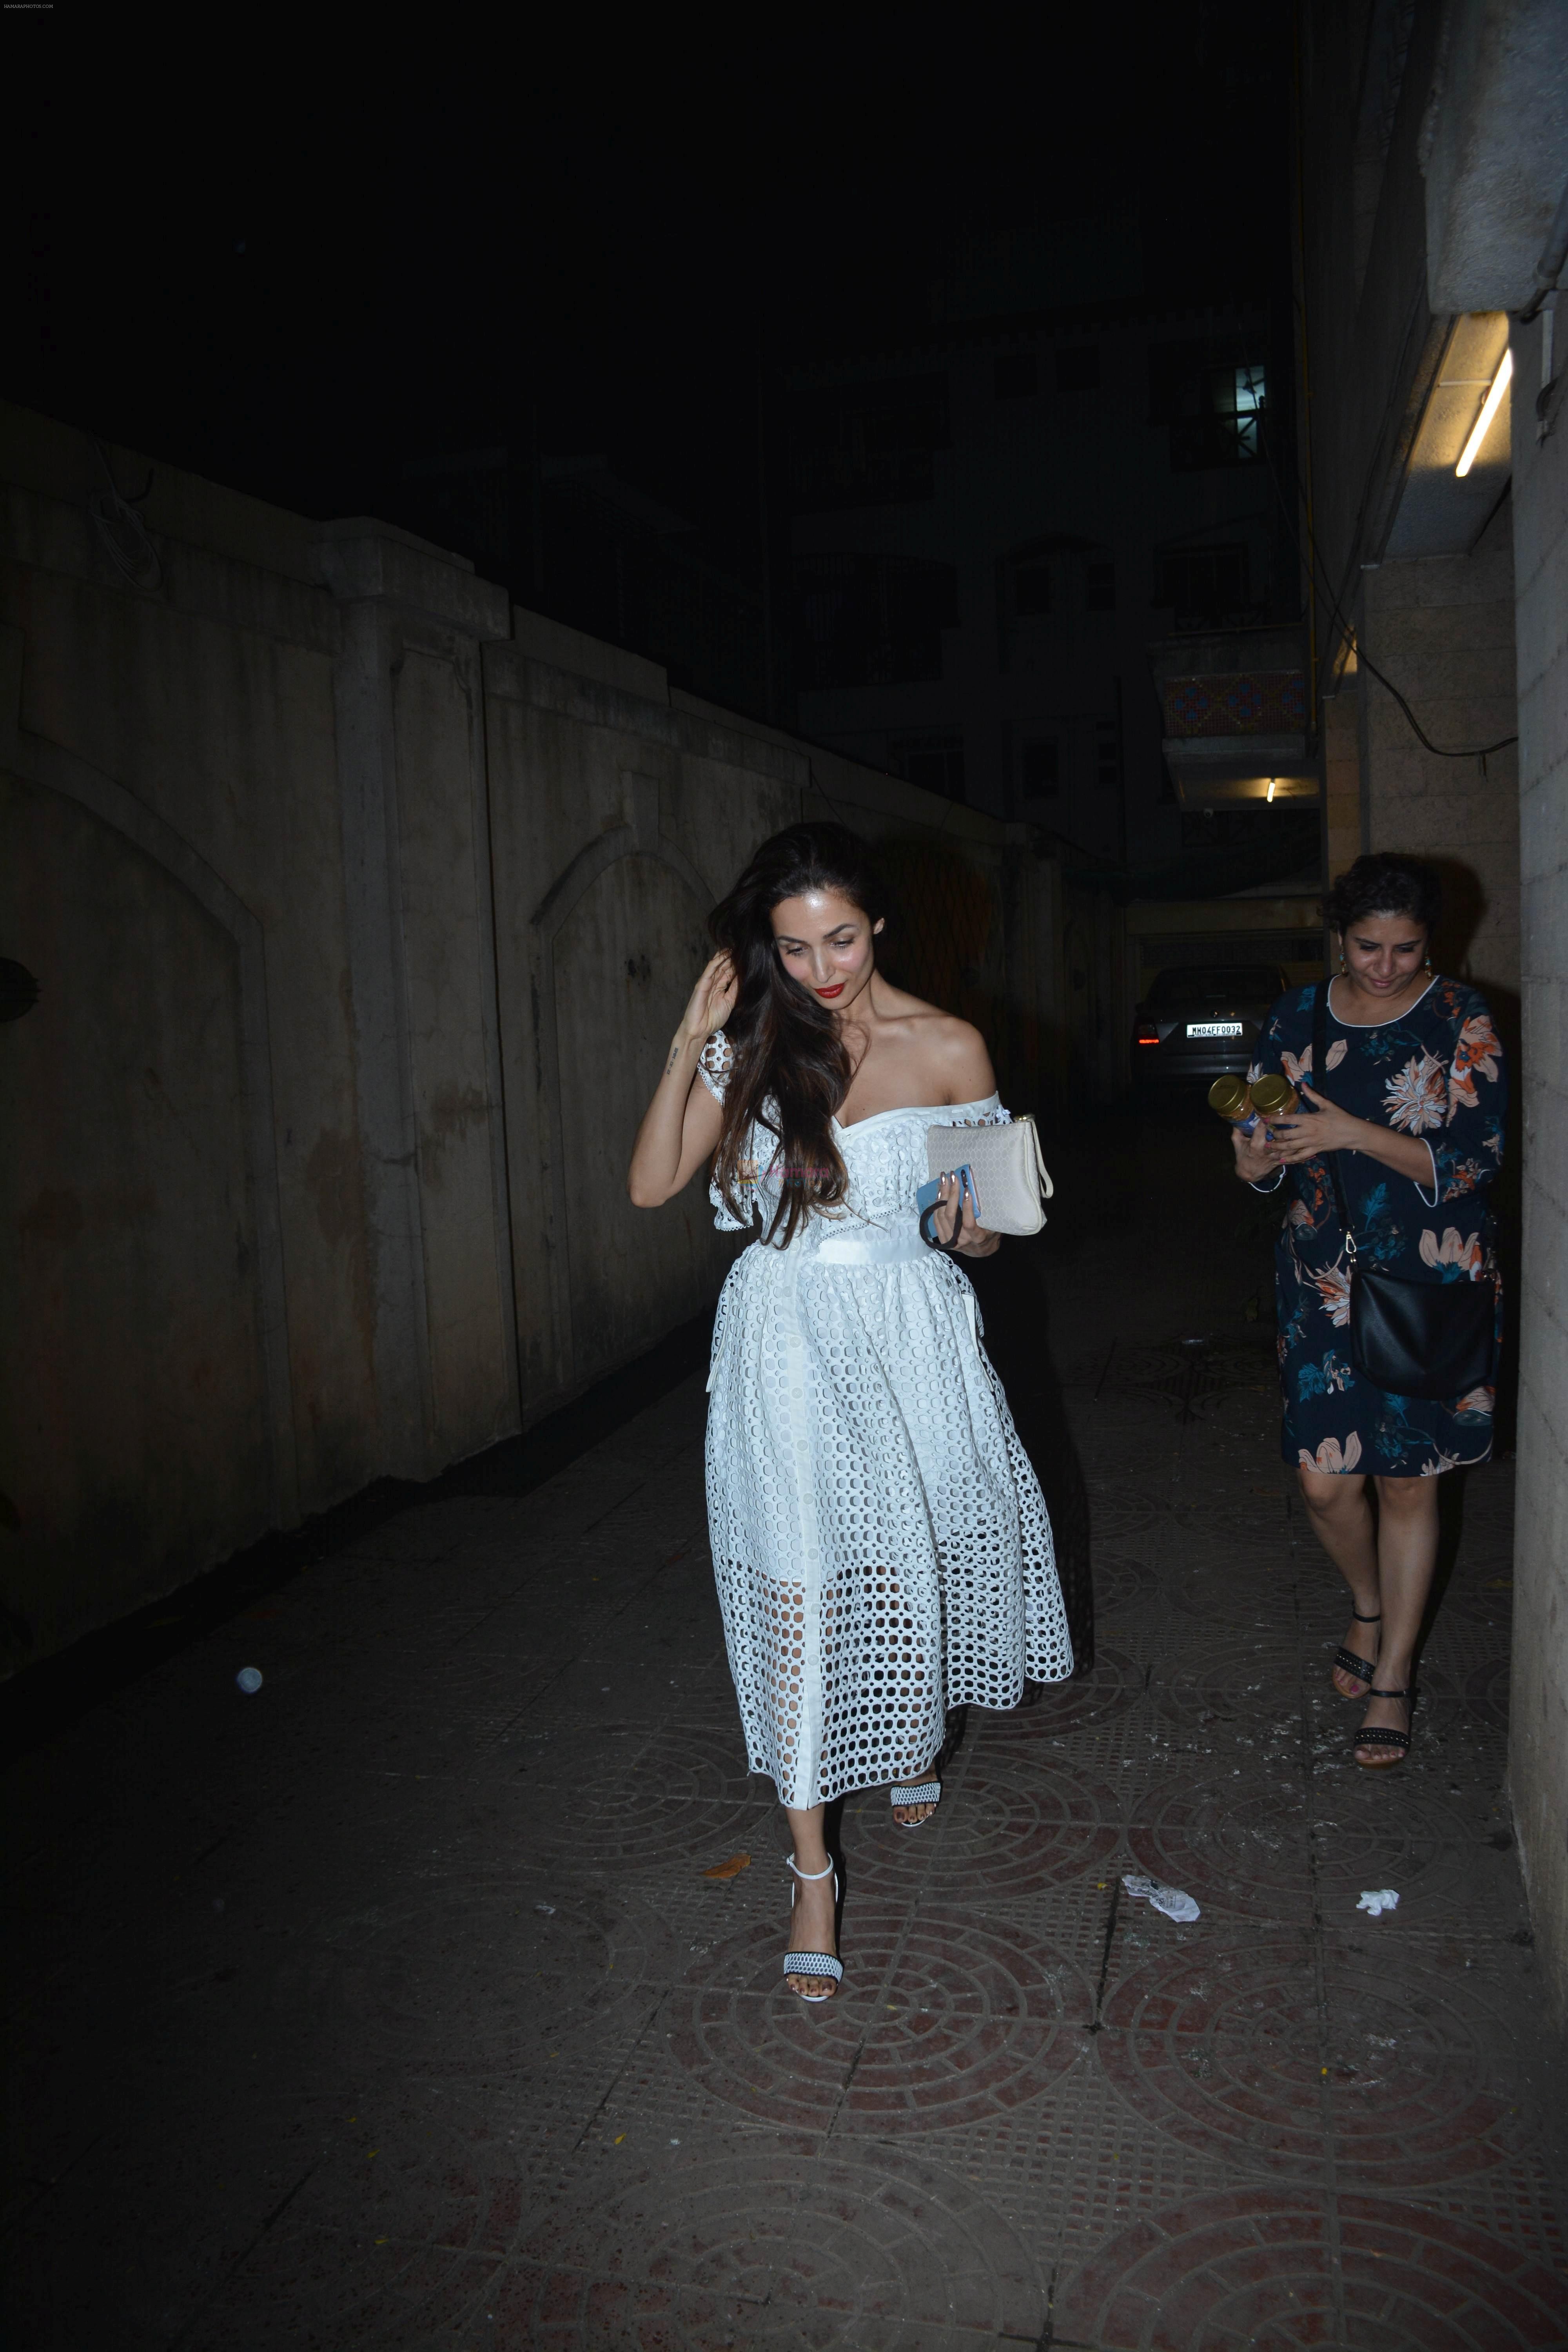 Malaika Arora's mother's birthday party in bandra on 8th Aug 2018